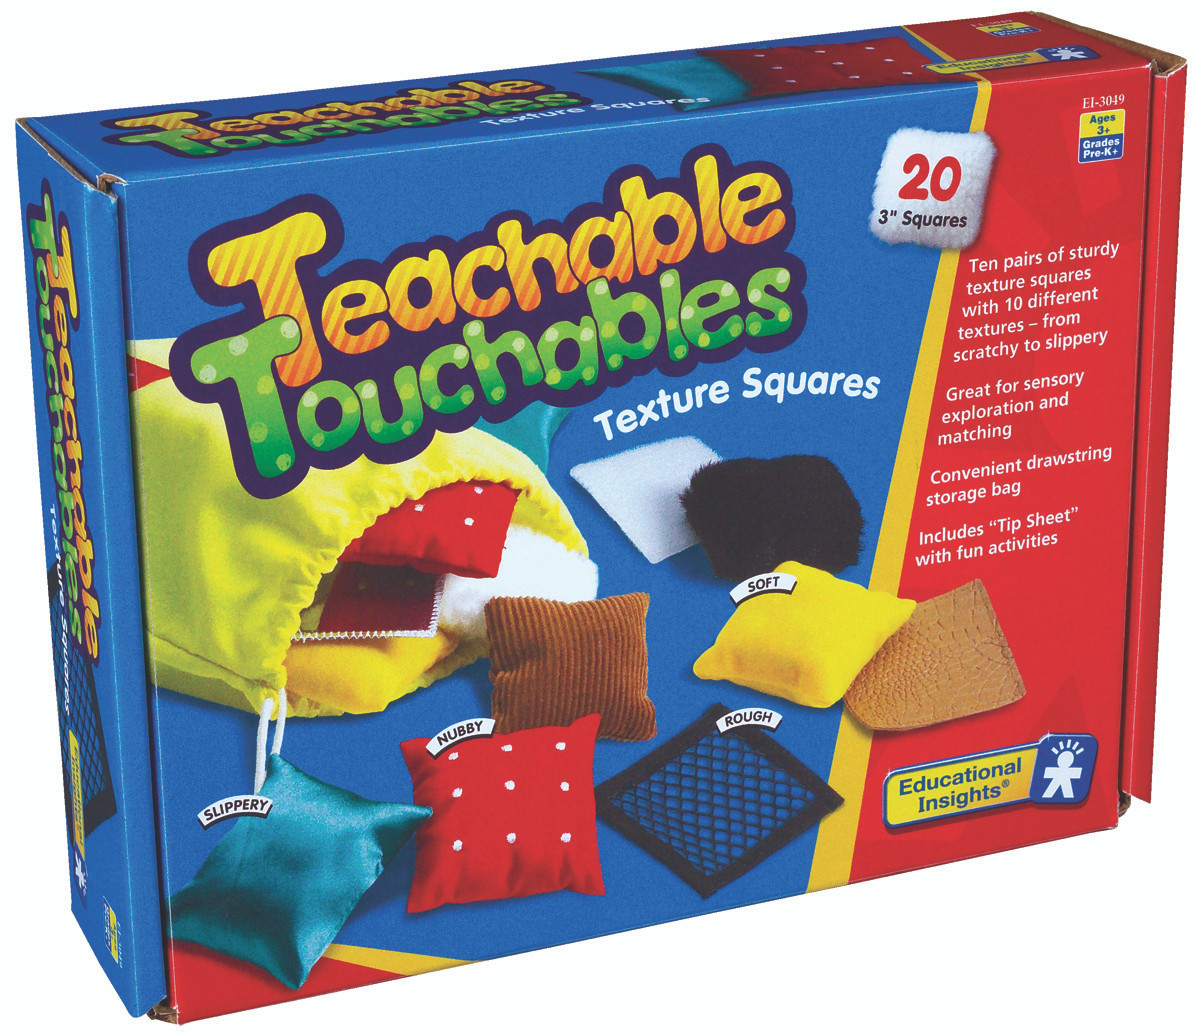 Teachable Touchables™ Texture Squares Builds tactile awareness and vocabulary 